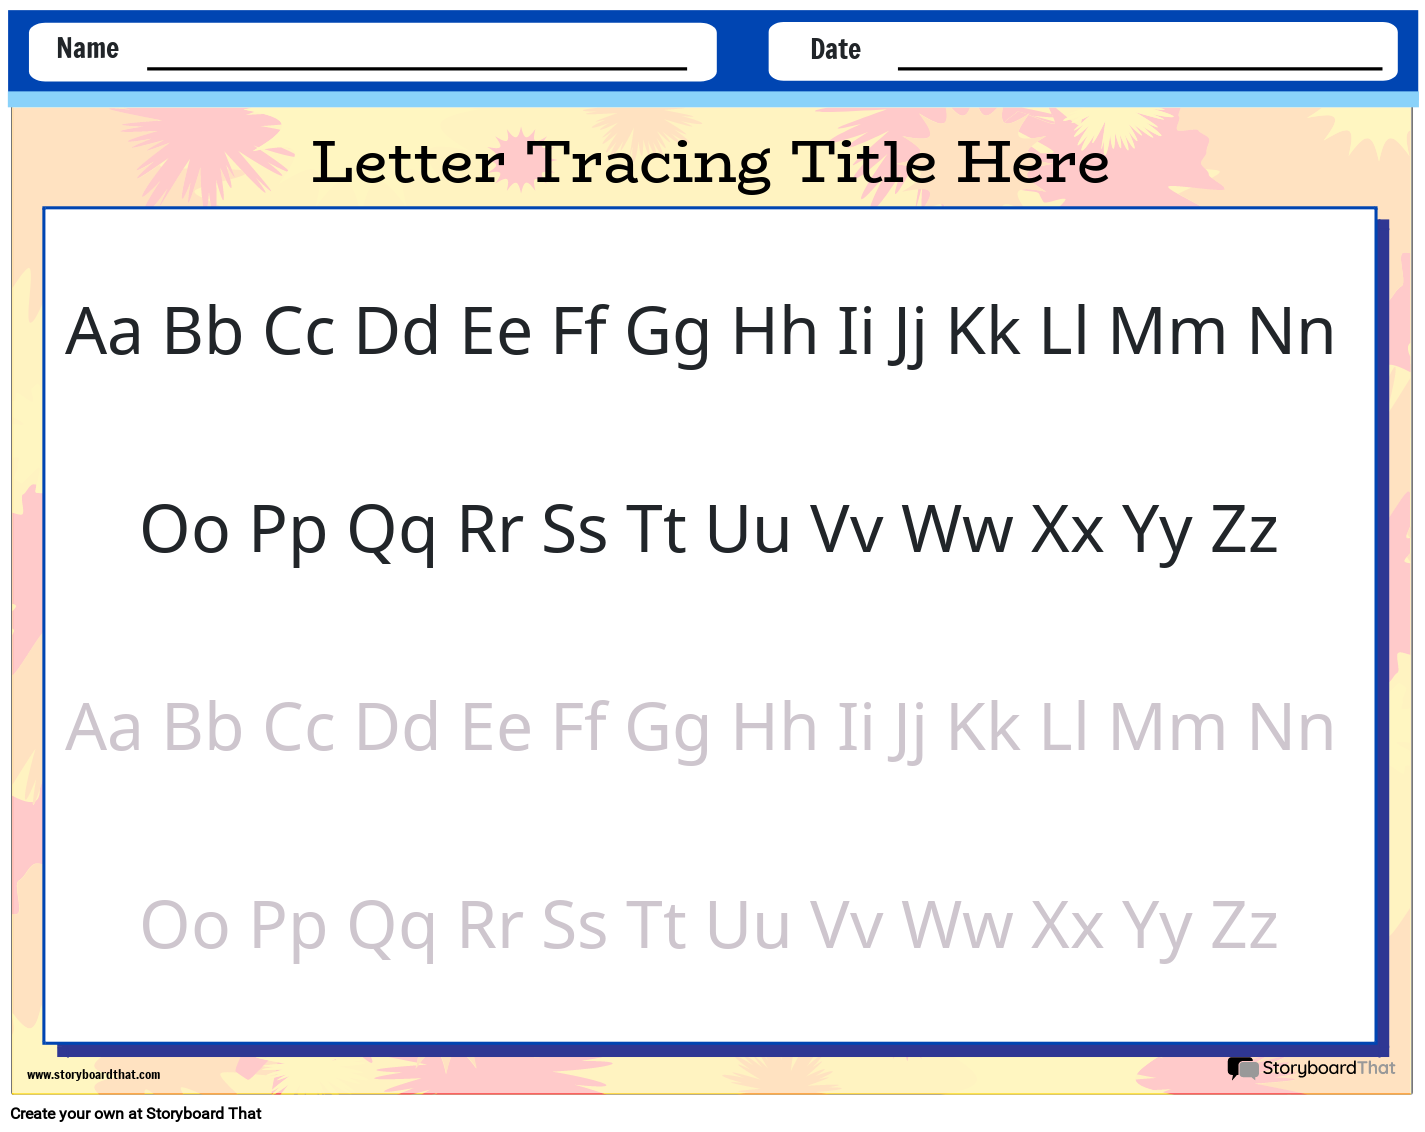 Letter Tracing Worksheet with Colorful Pastel Background